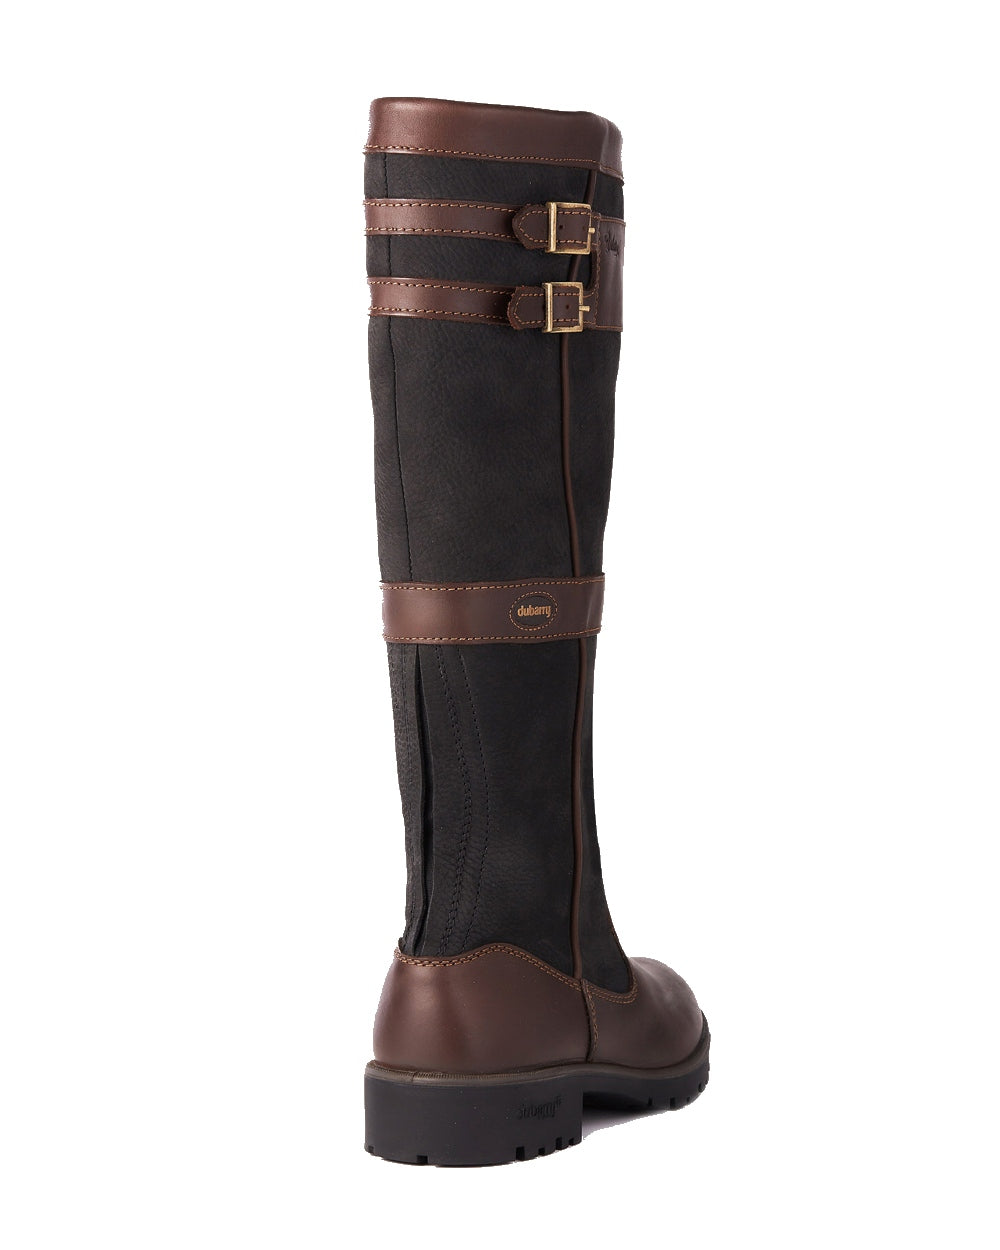 Dubarry Longford Country Boots in Black/Brown 